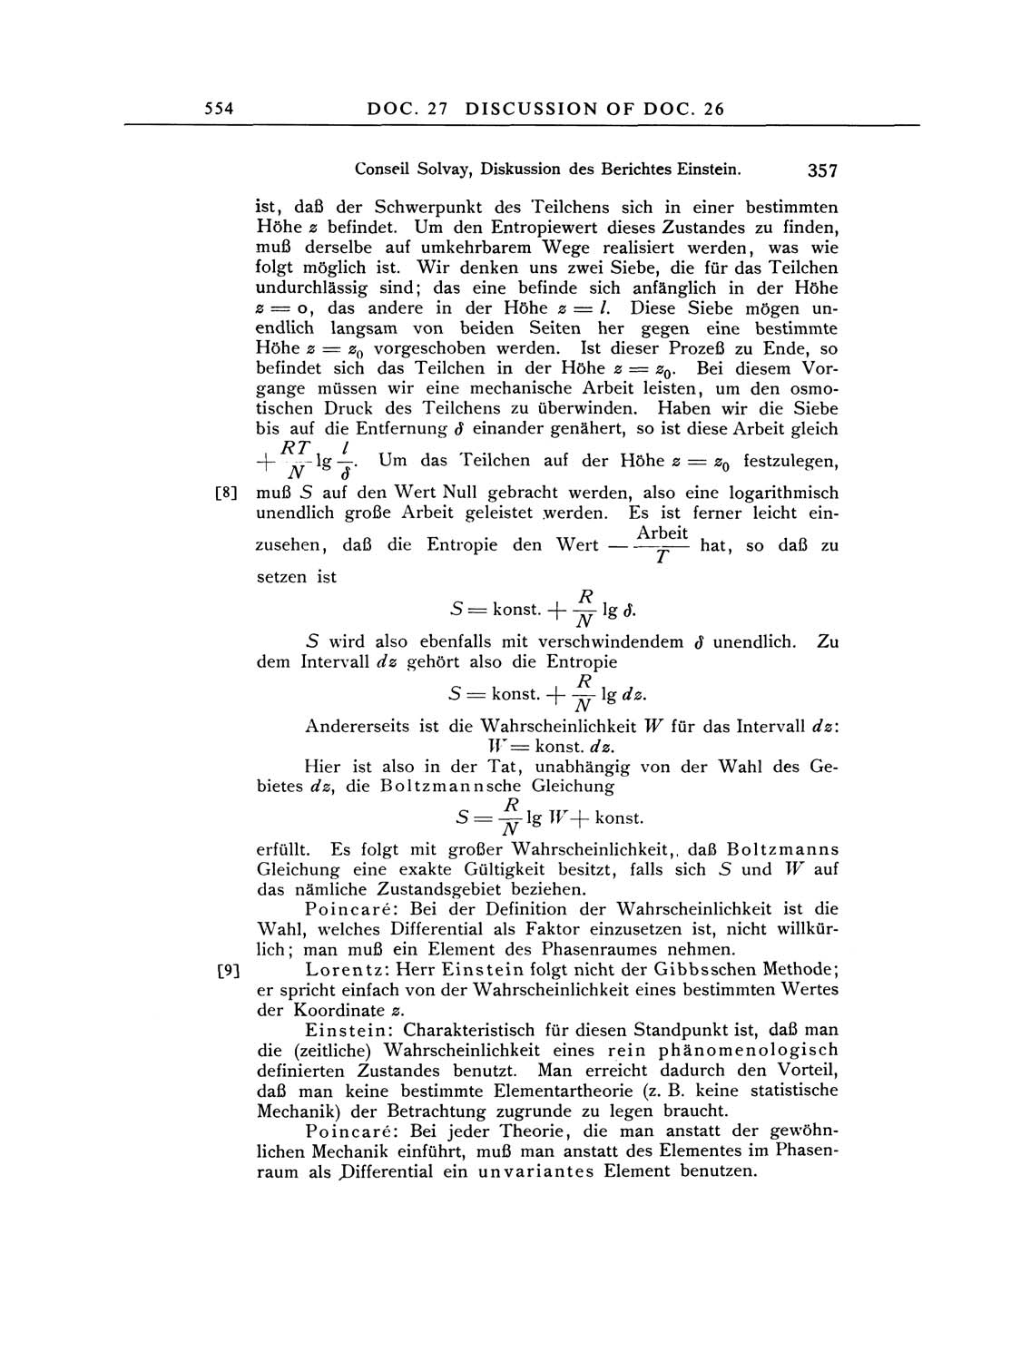 Volume 3: The Swiss Years: Writings 1909-1911 page 554